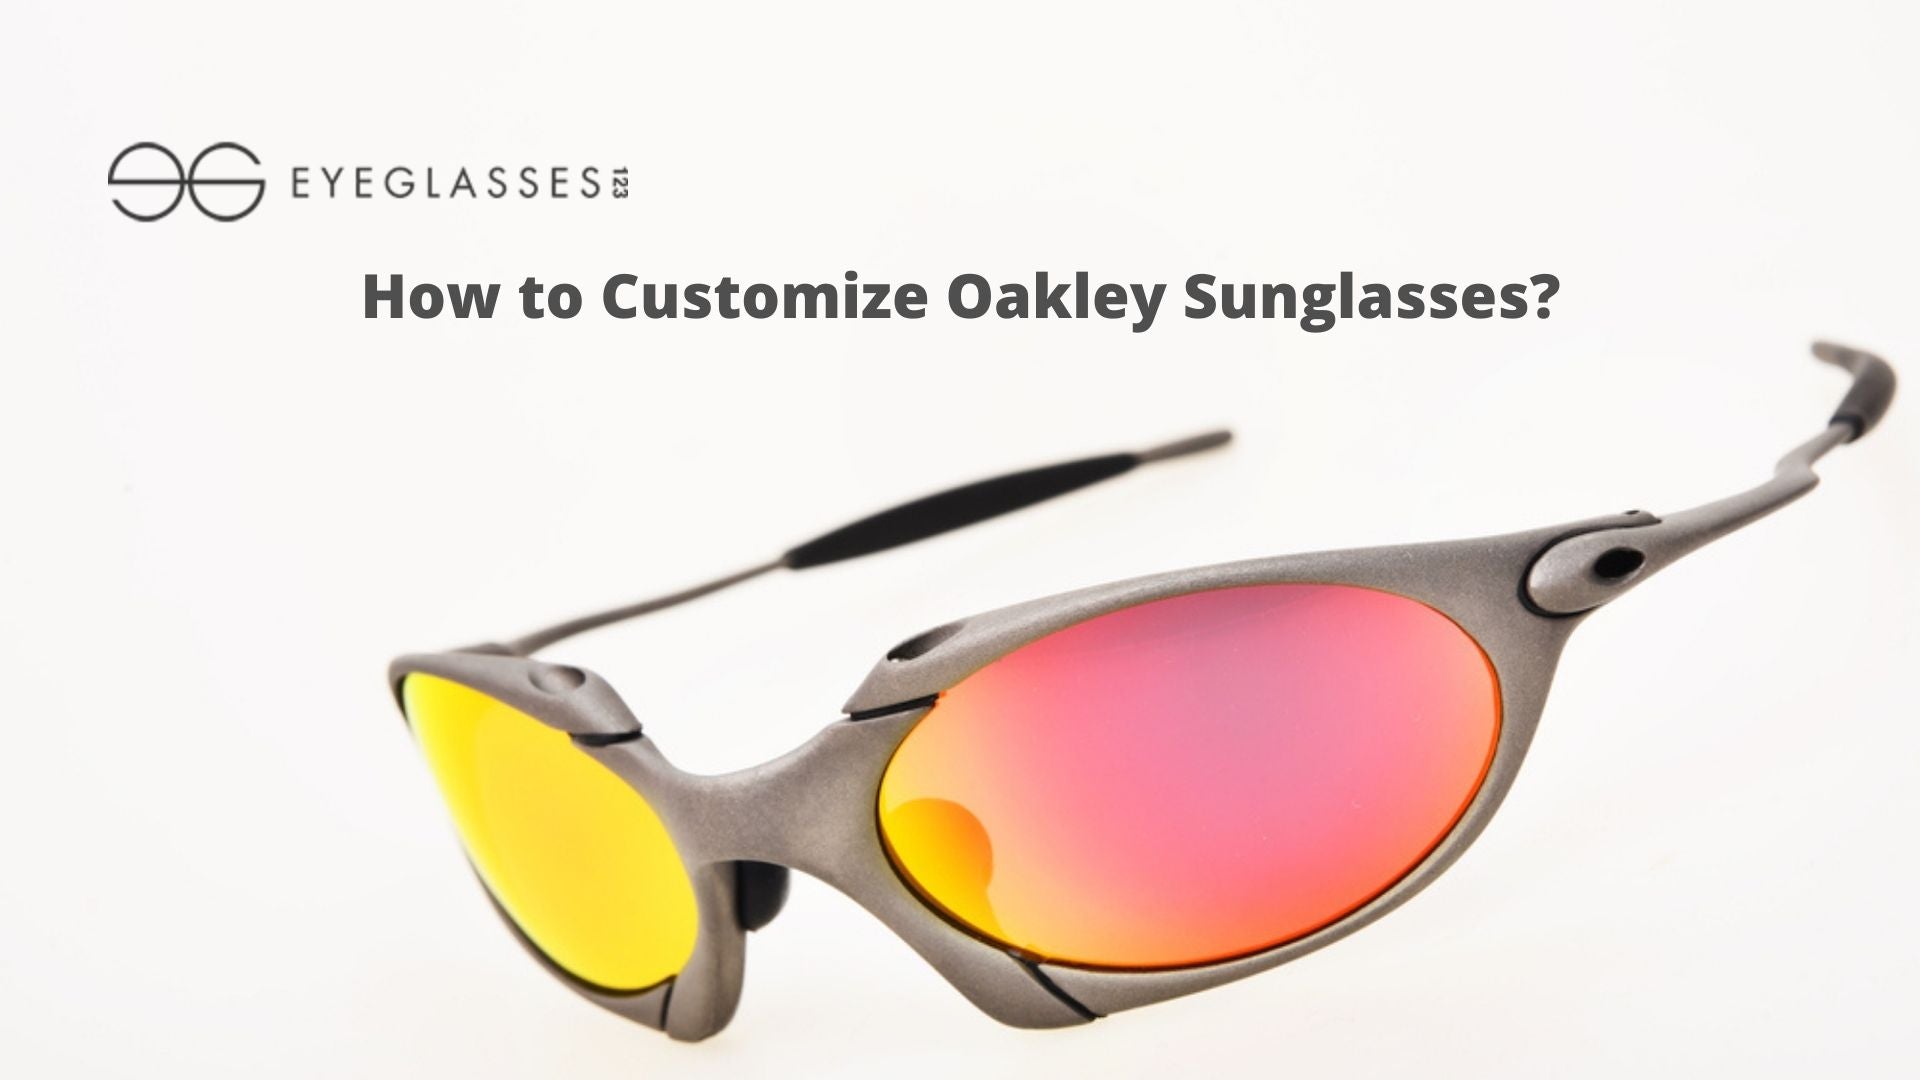 How to Customize Oakley Sunglasses